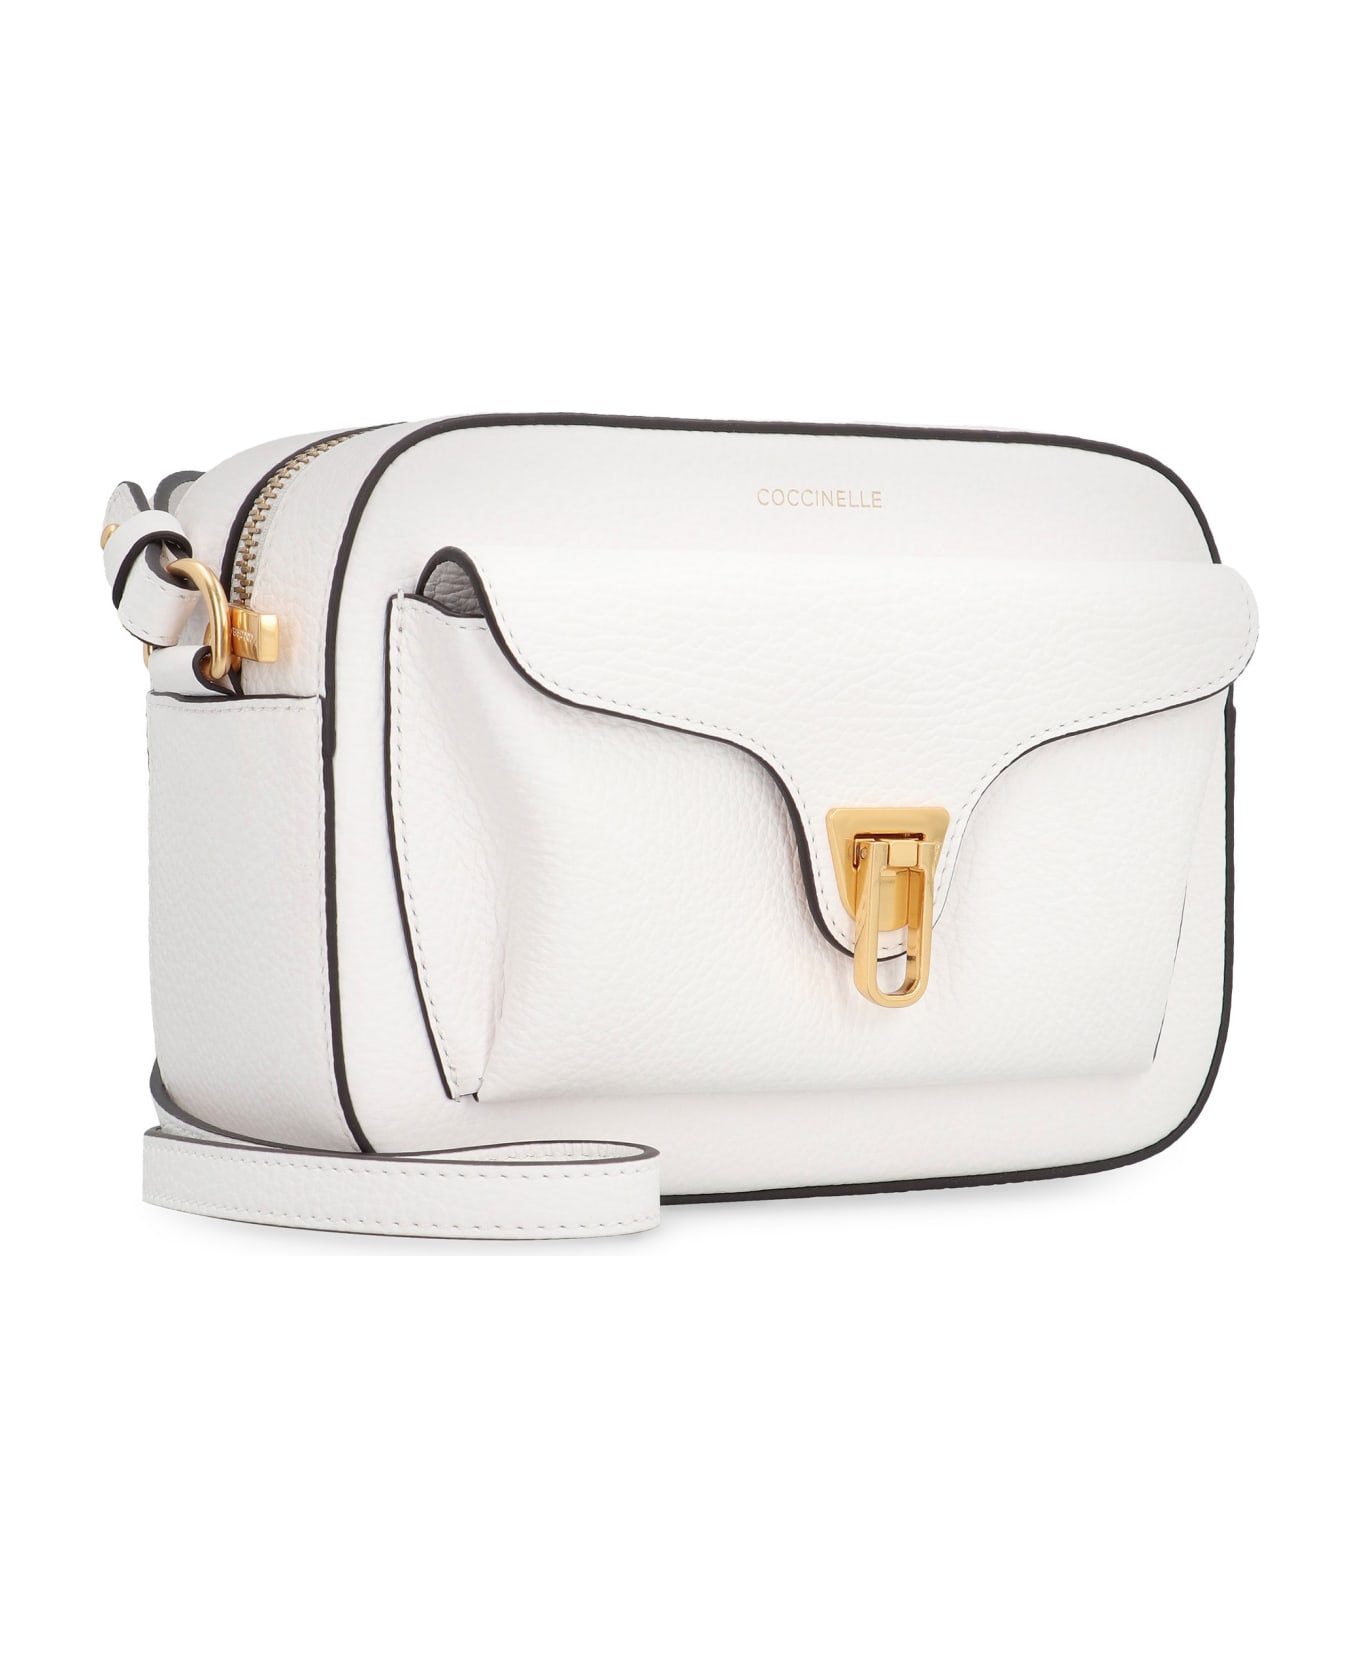 Coccinelle Beat Soft Leather Crossbody Bag - White ショルダーバッグ